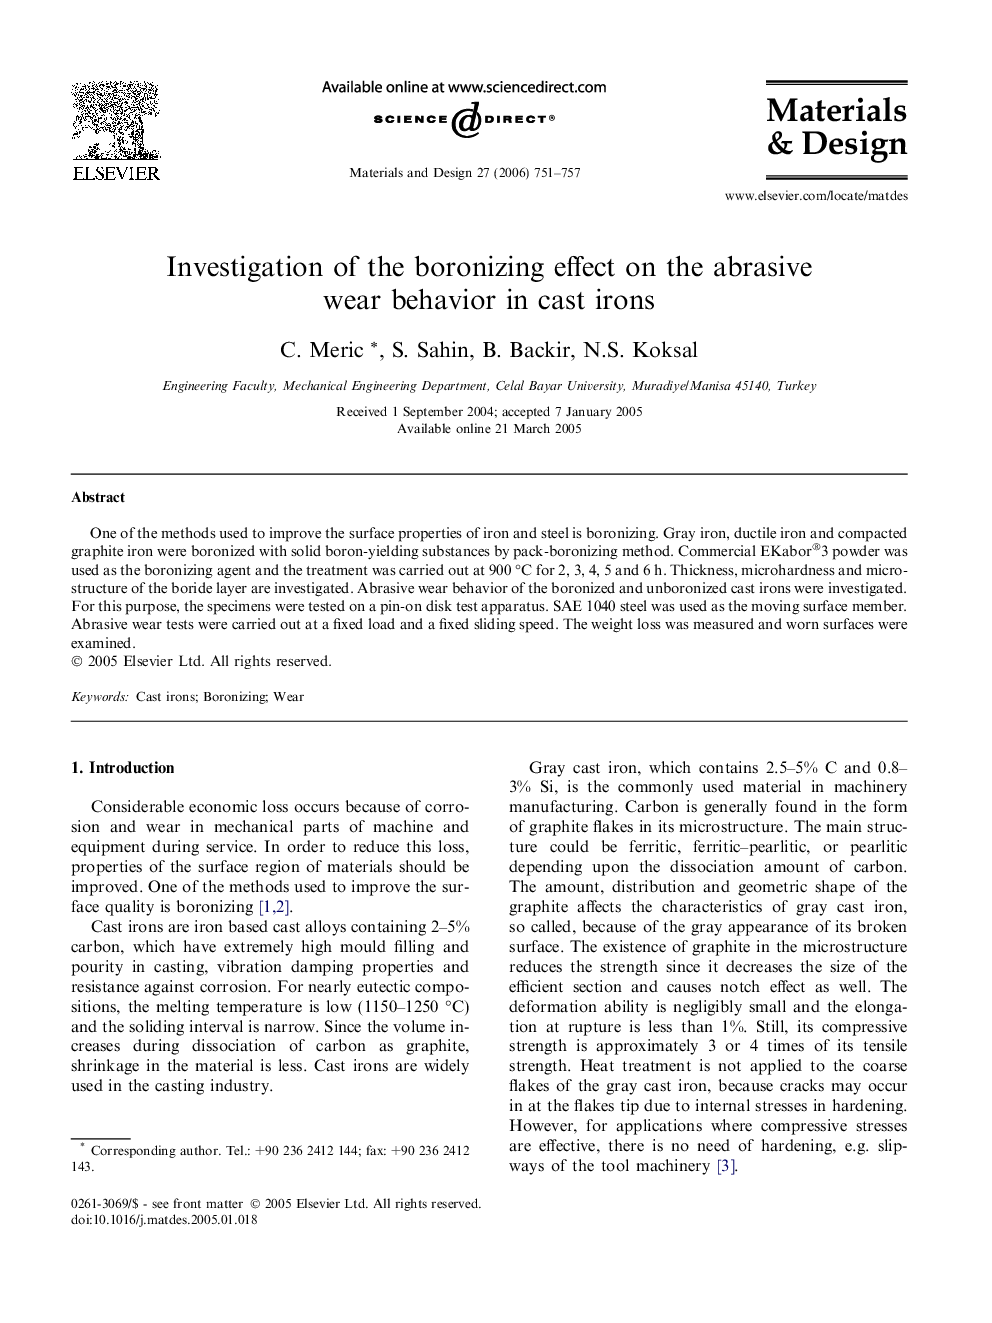 Investigation of the boronizing effect on the abrasive wear behavior in cast irons